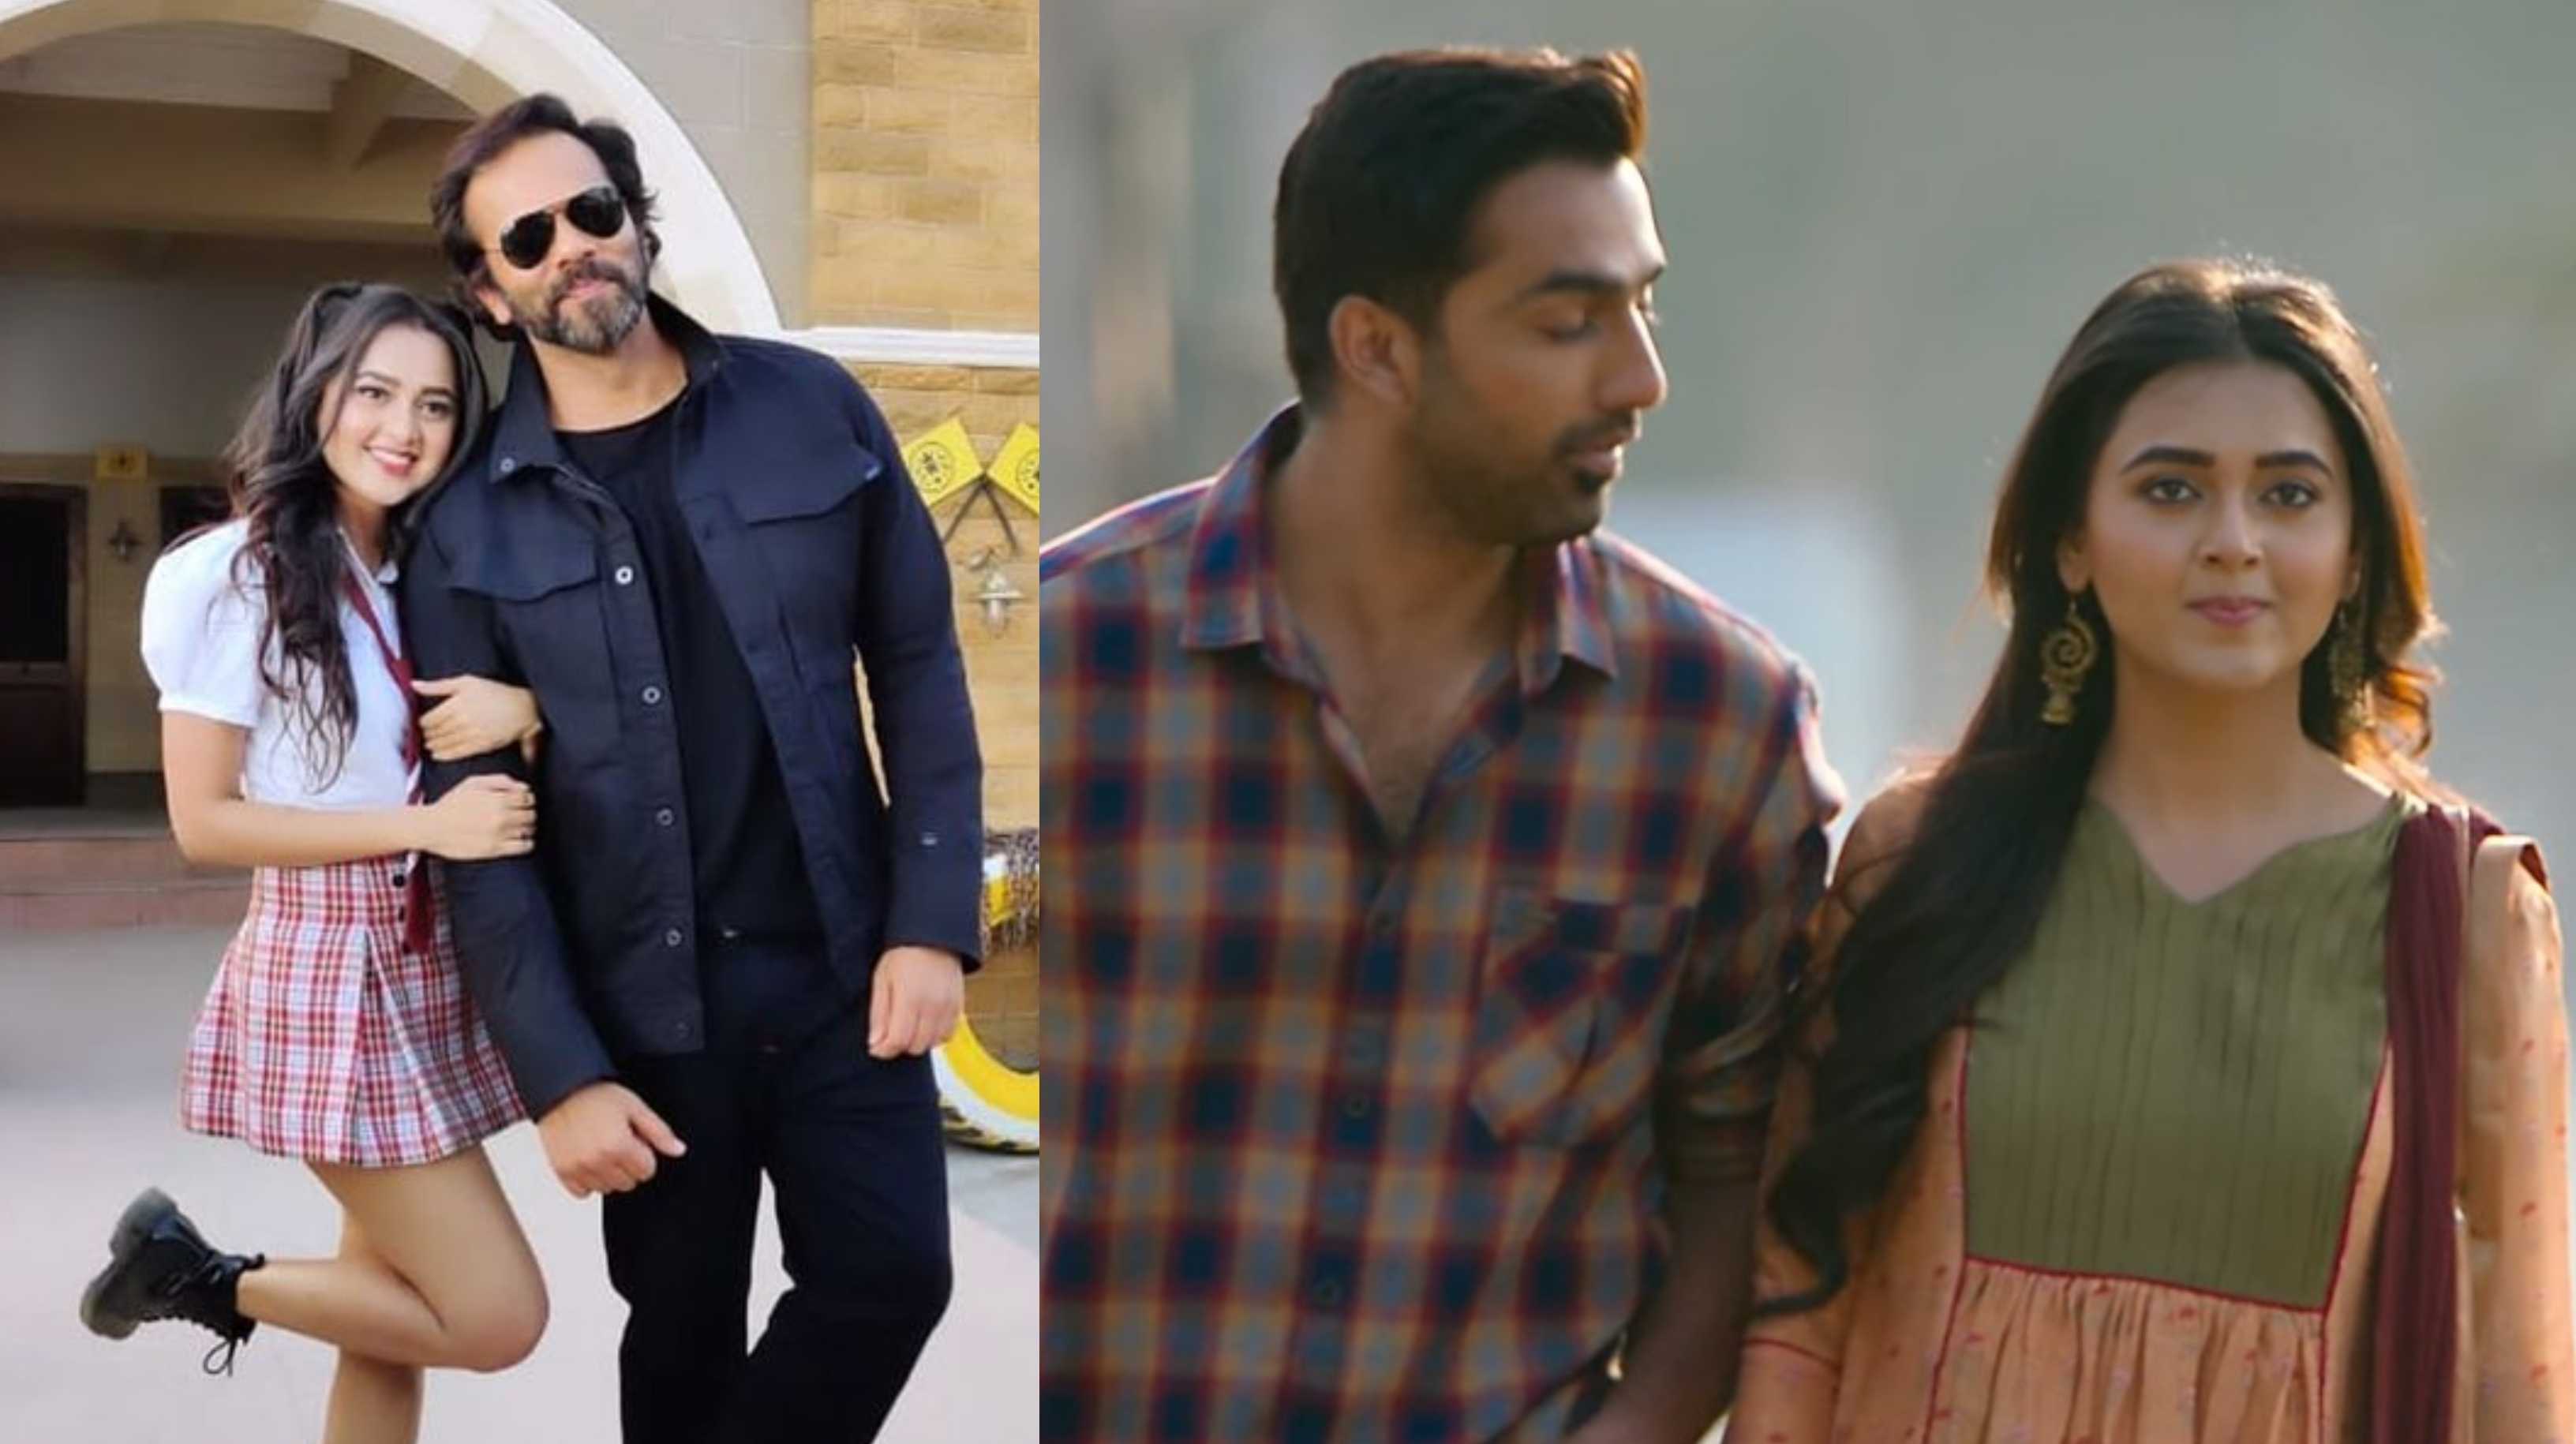 School College Ani Life Trailer: Fans gush over Tejasswi’s screen presence, hope to see her in Rohit Shetty’s next Golmaal